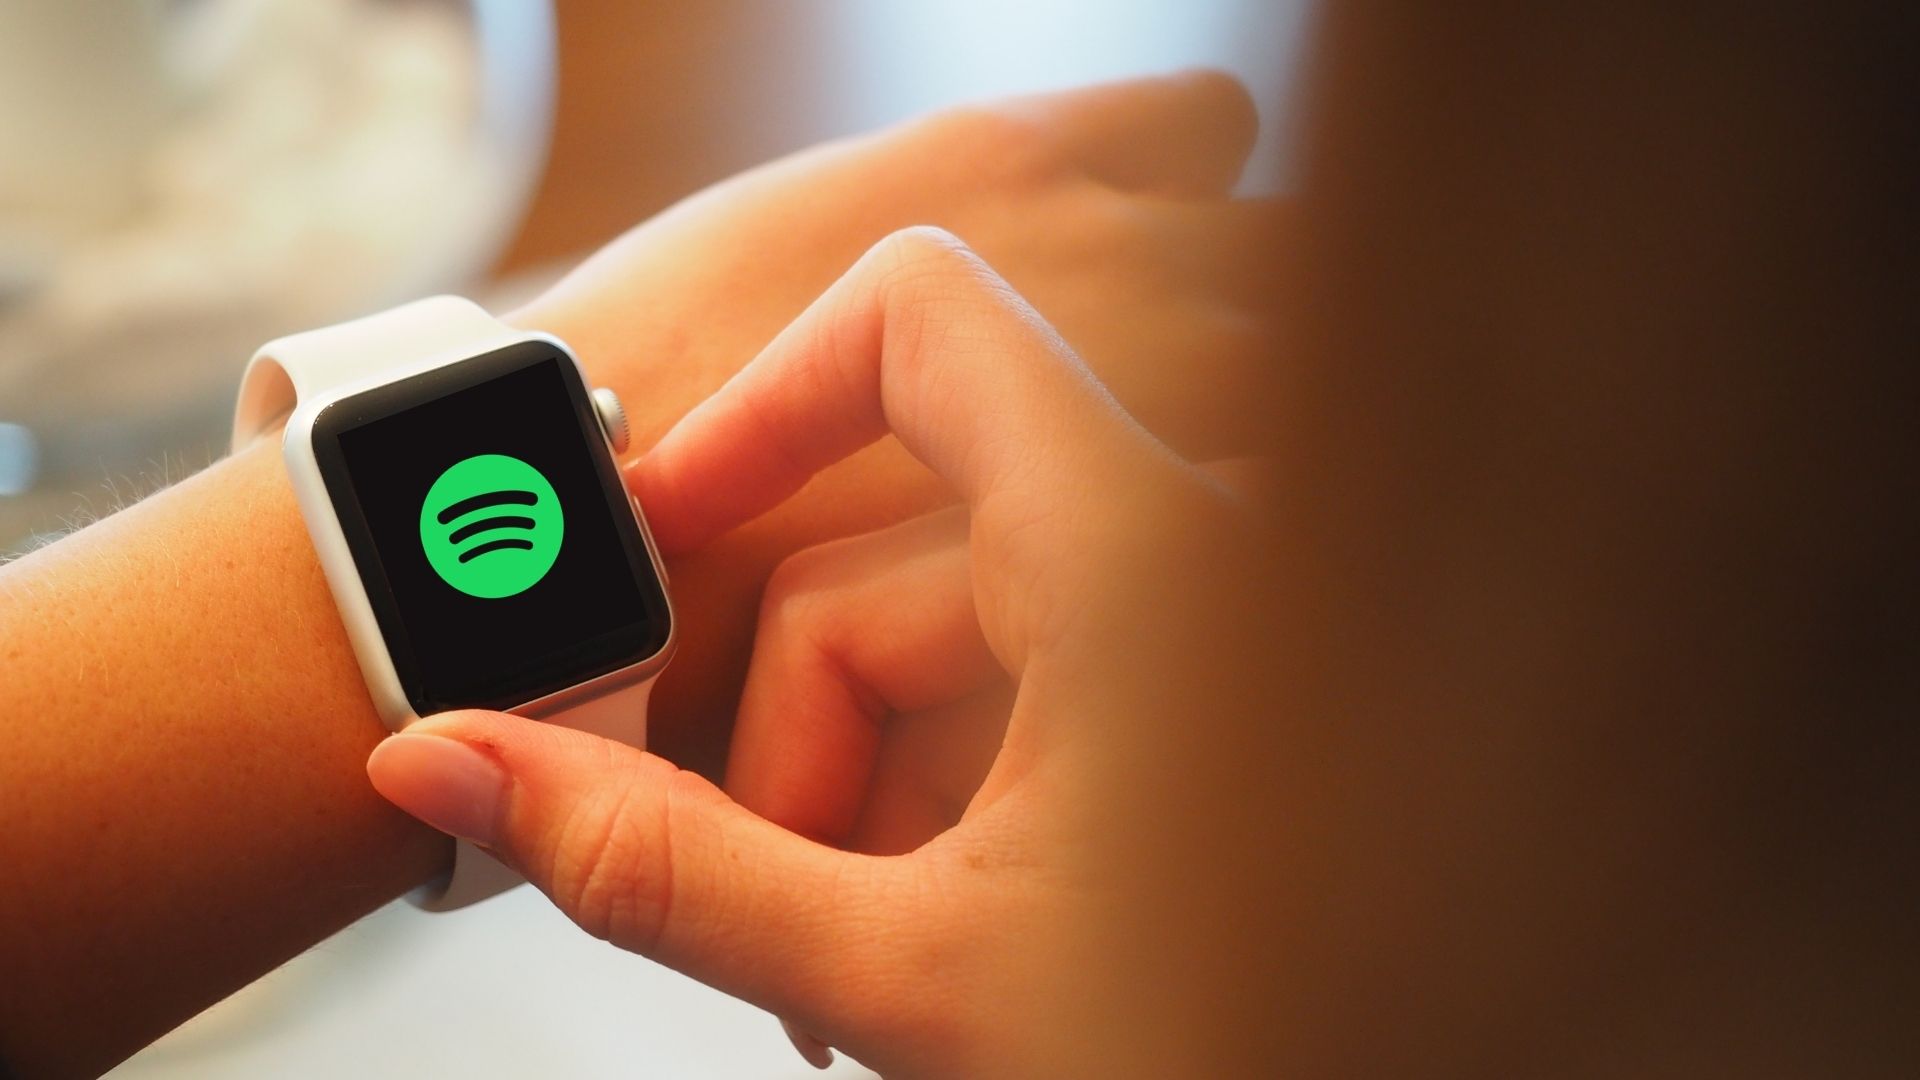 Spotify finally testing Apple Watch streaming support with some users, ViacomCBS Confirms Paramount+ As New Streaming Name For CBS All Access And Other Top News